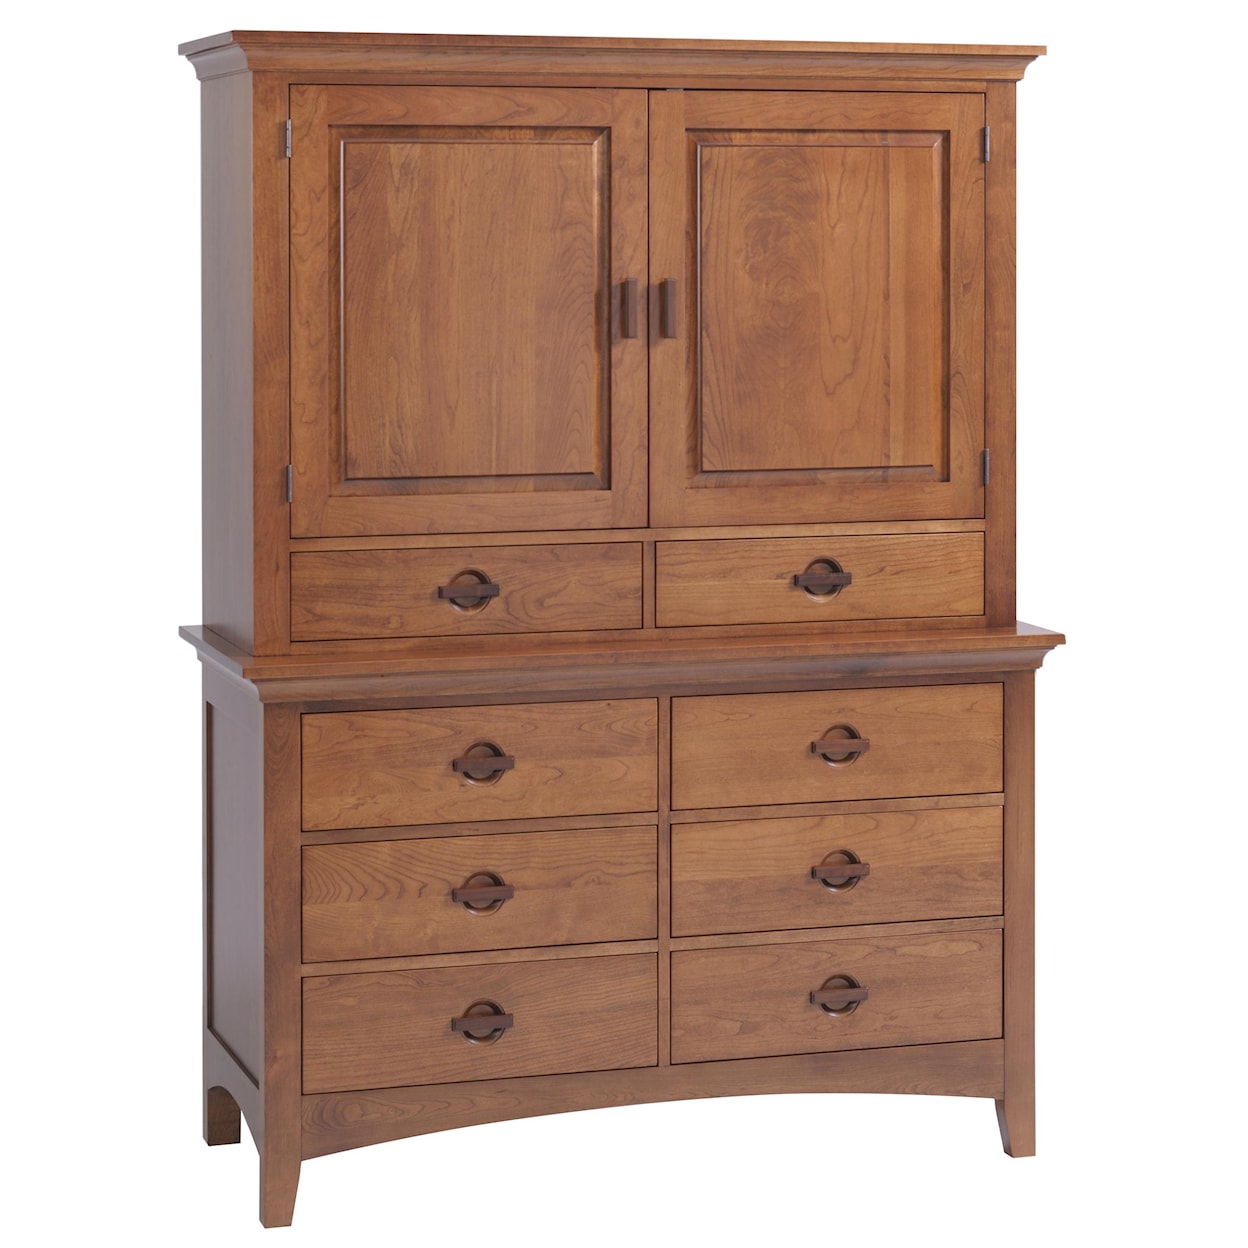 Country View Woodworking Great Lakes Small Dresser/Armoire Base